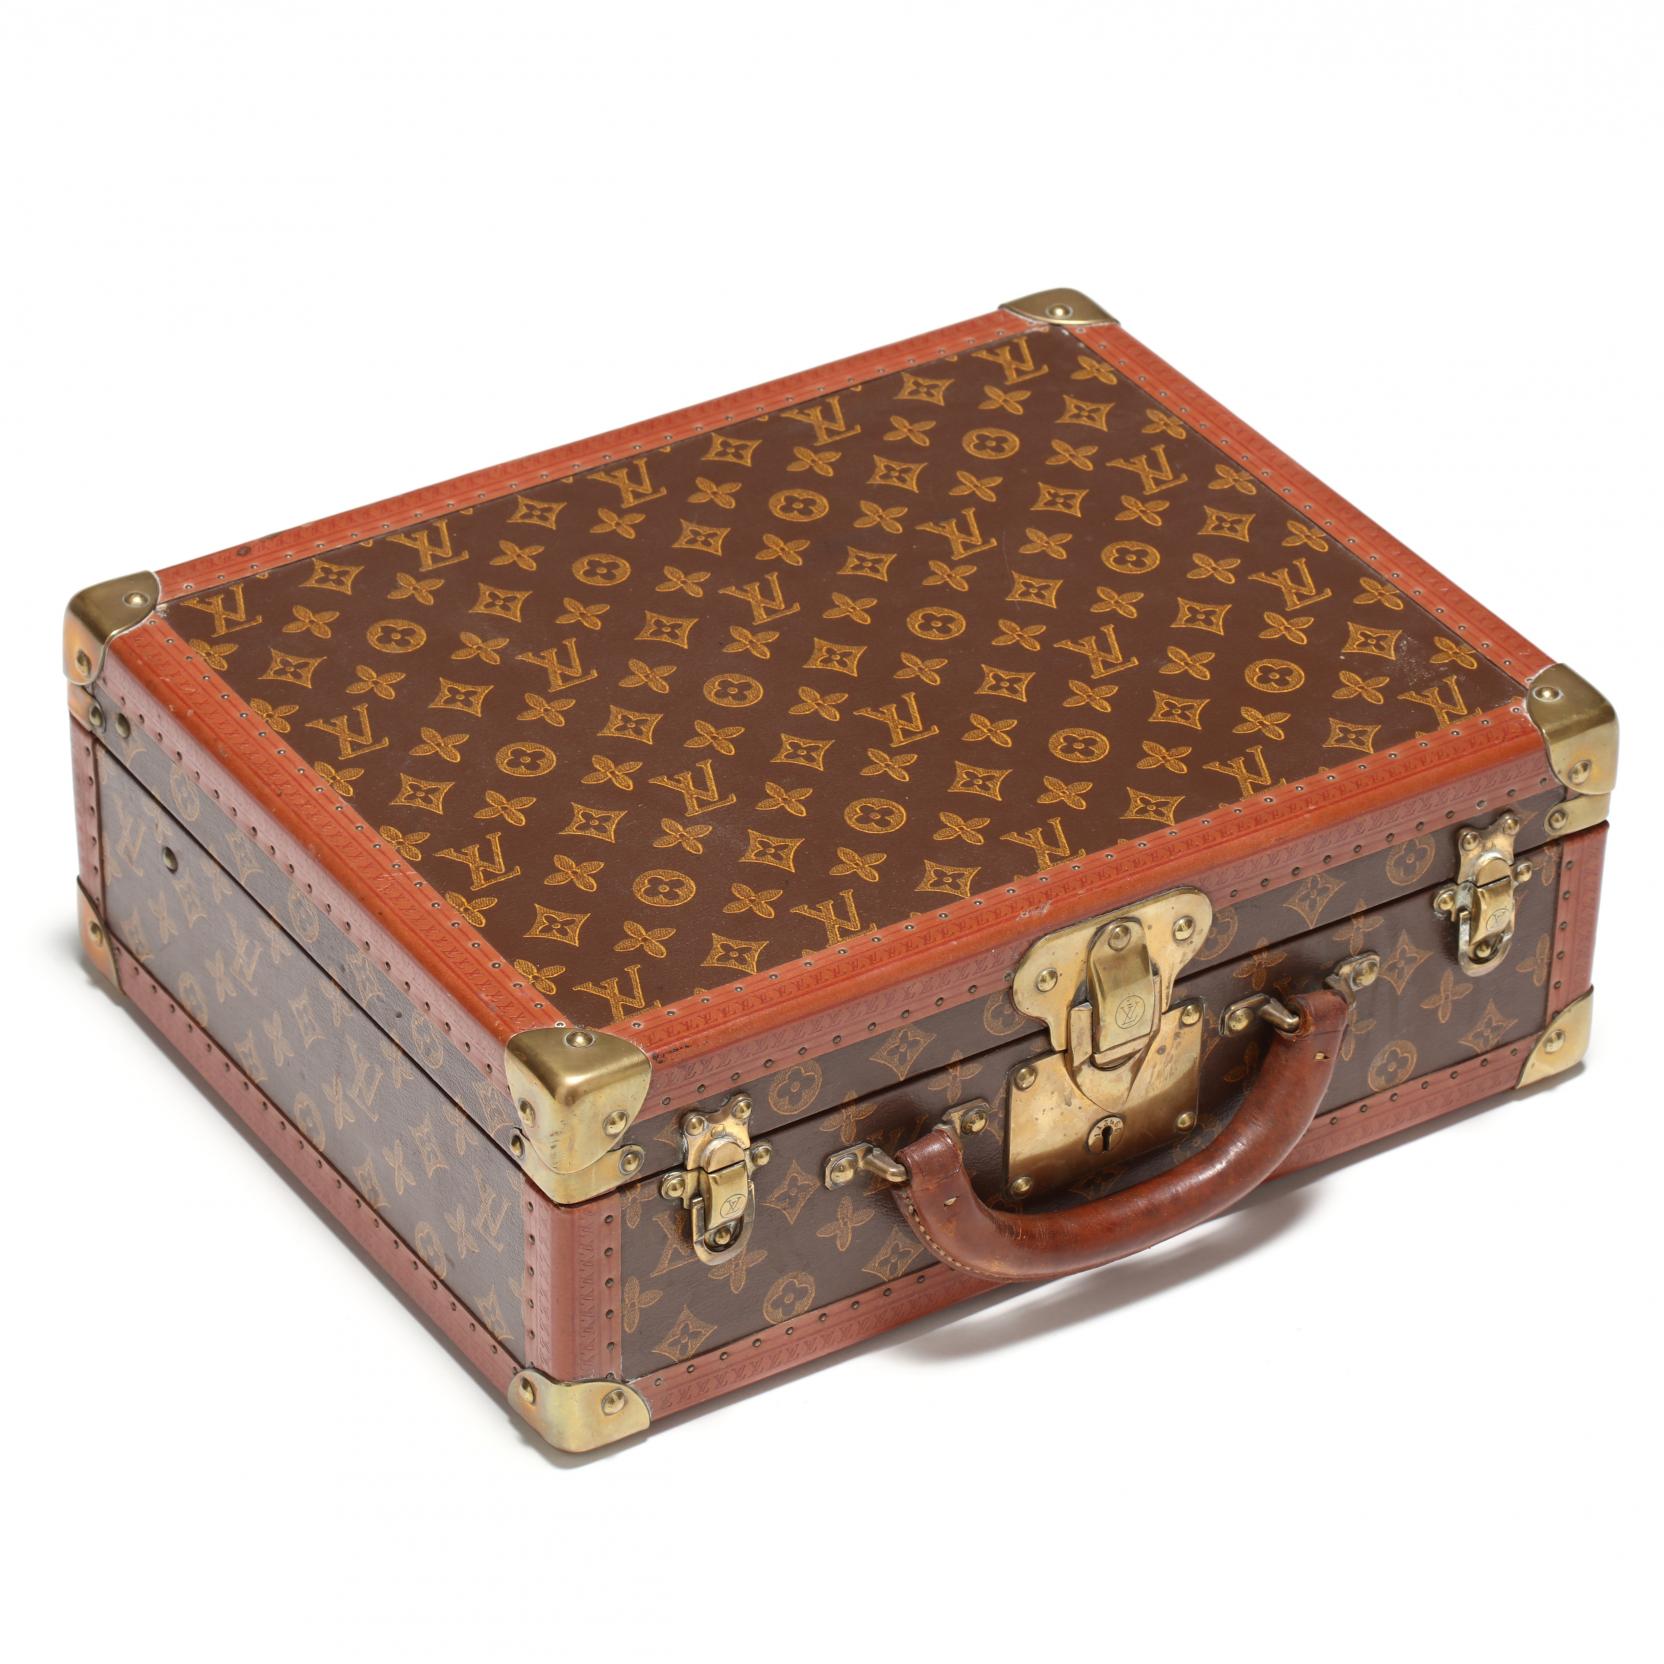 Sold at Auction: LOUIS VUITTON, KOFFER COTTEVILLE